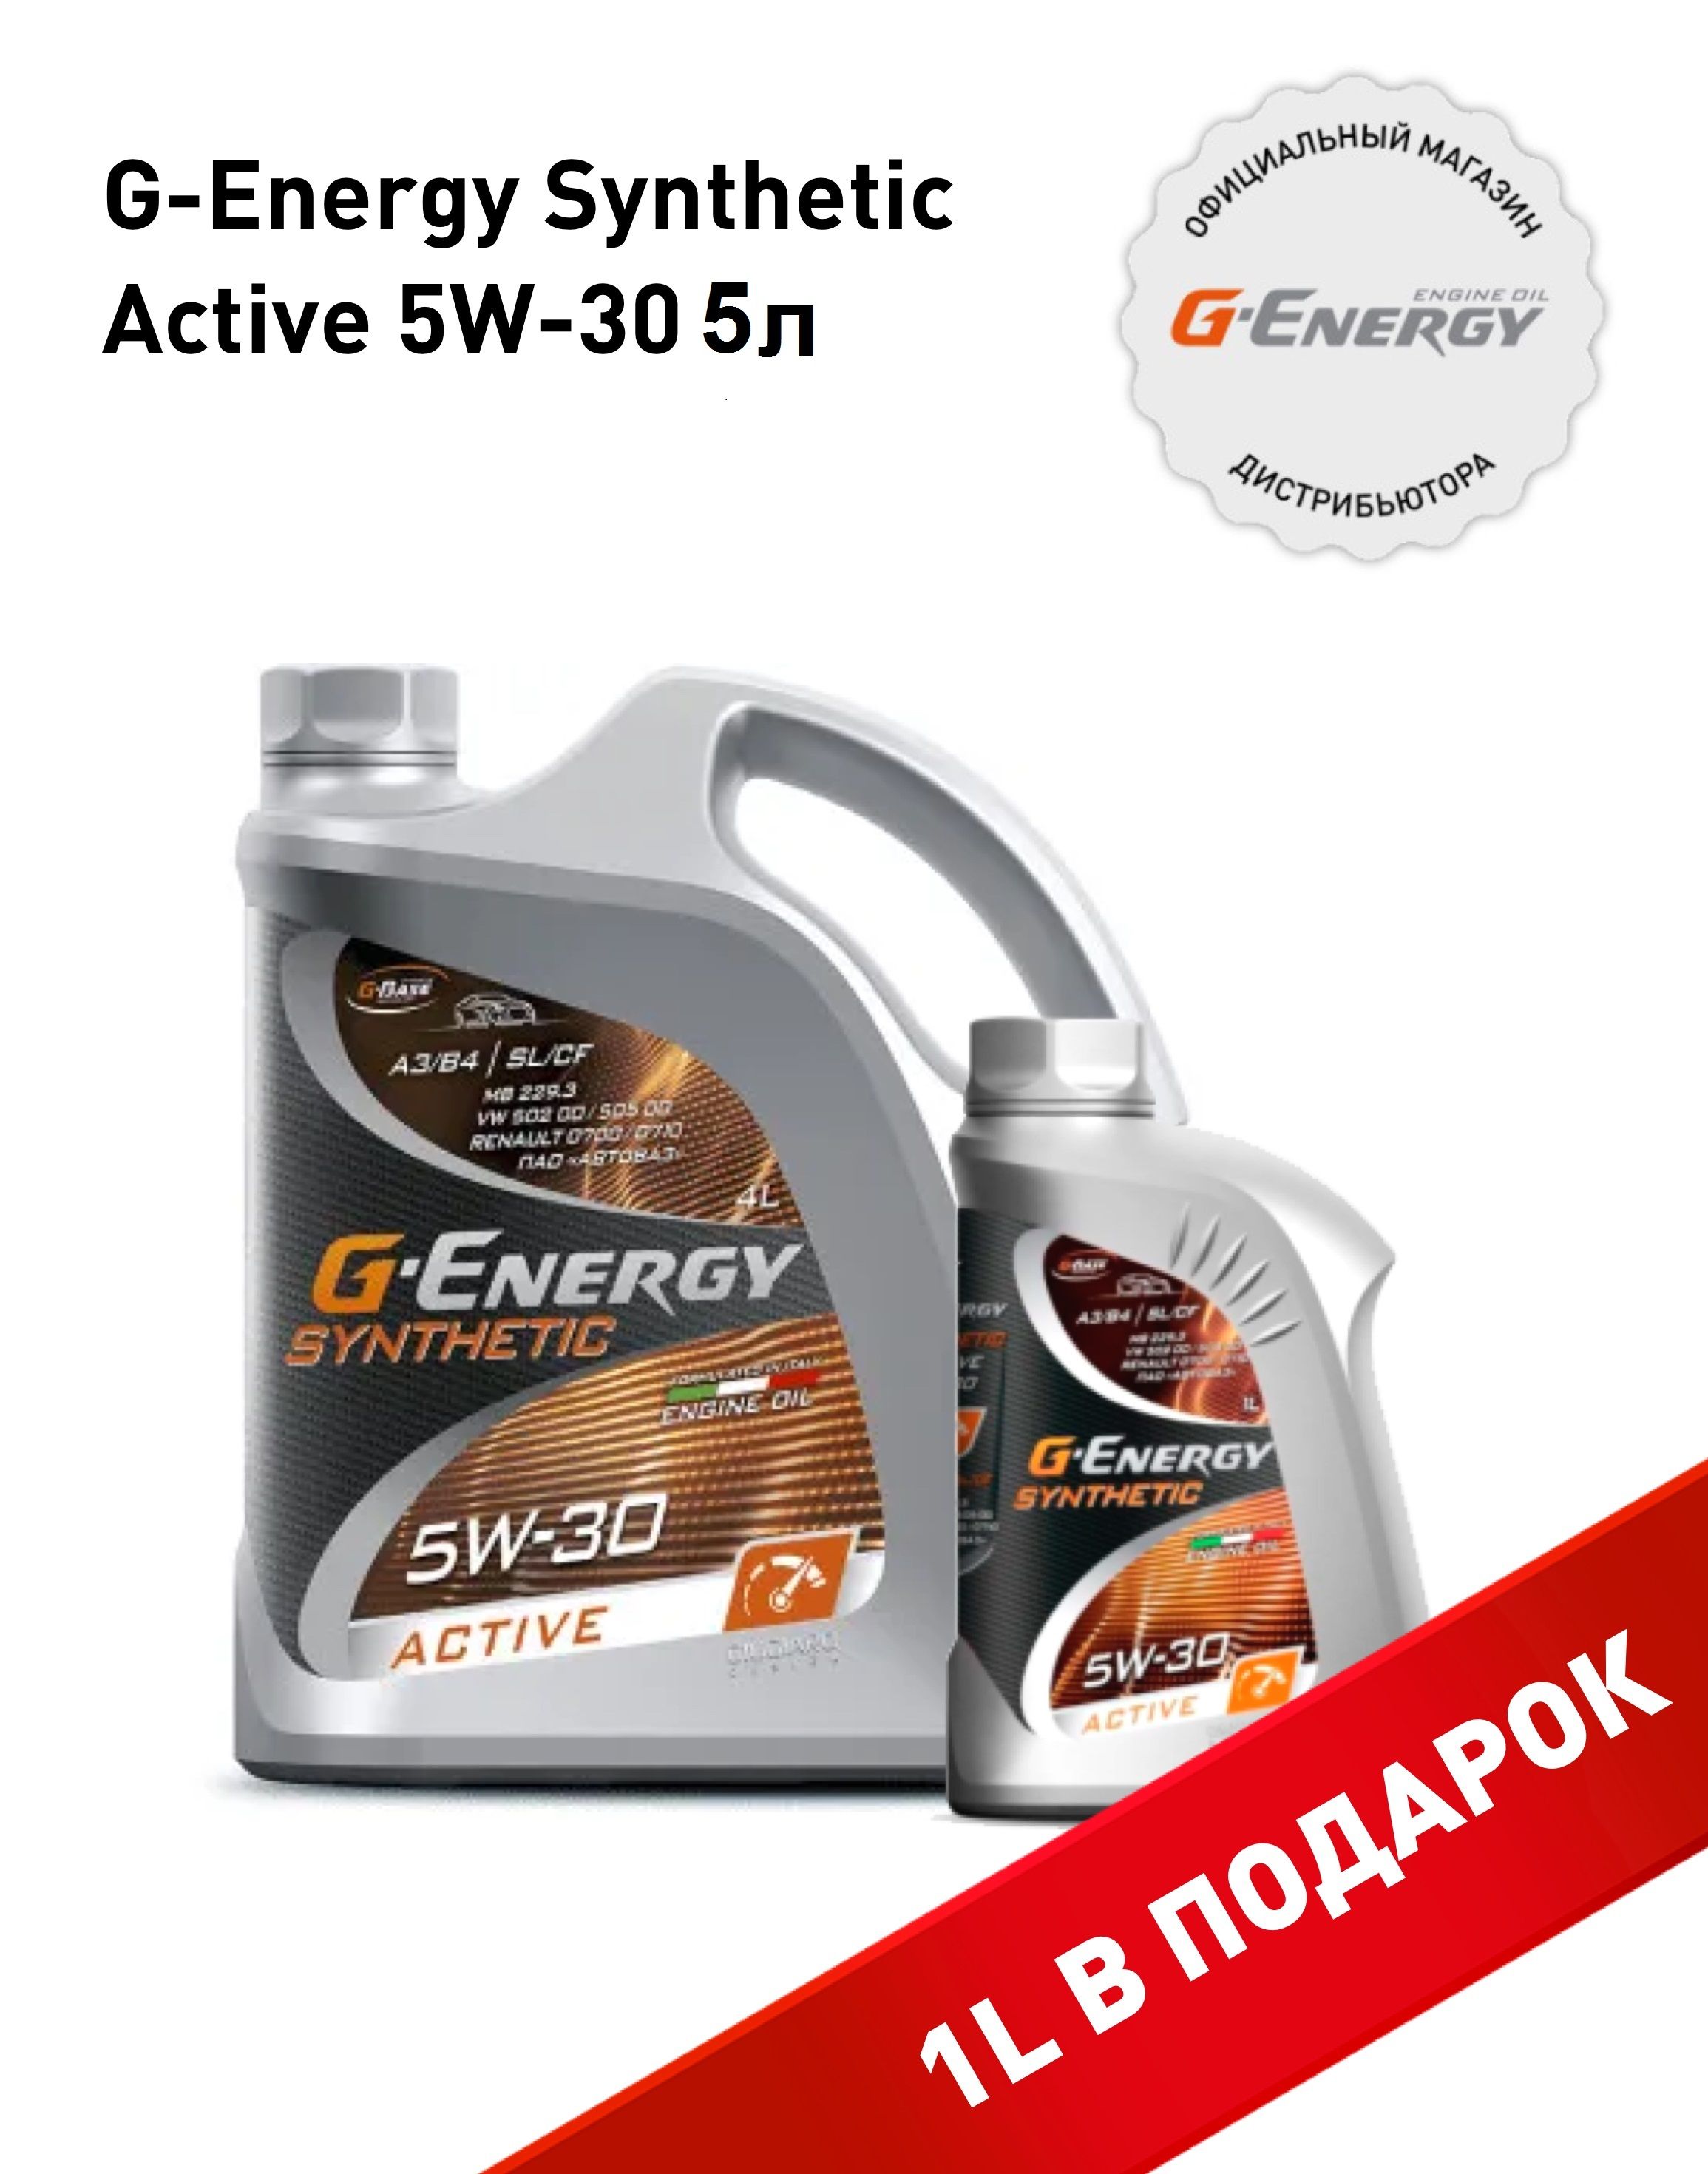 Energy synthetic active 5w 30. G-Energy Synthetic Active 5w-30.